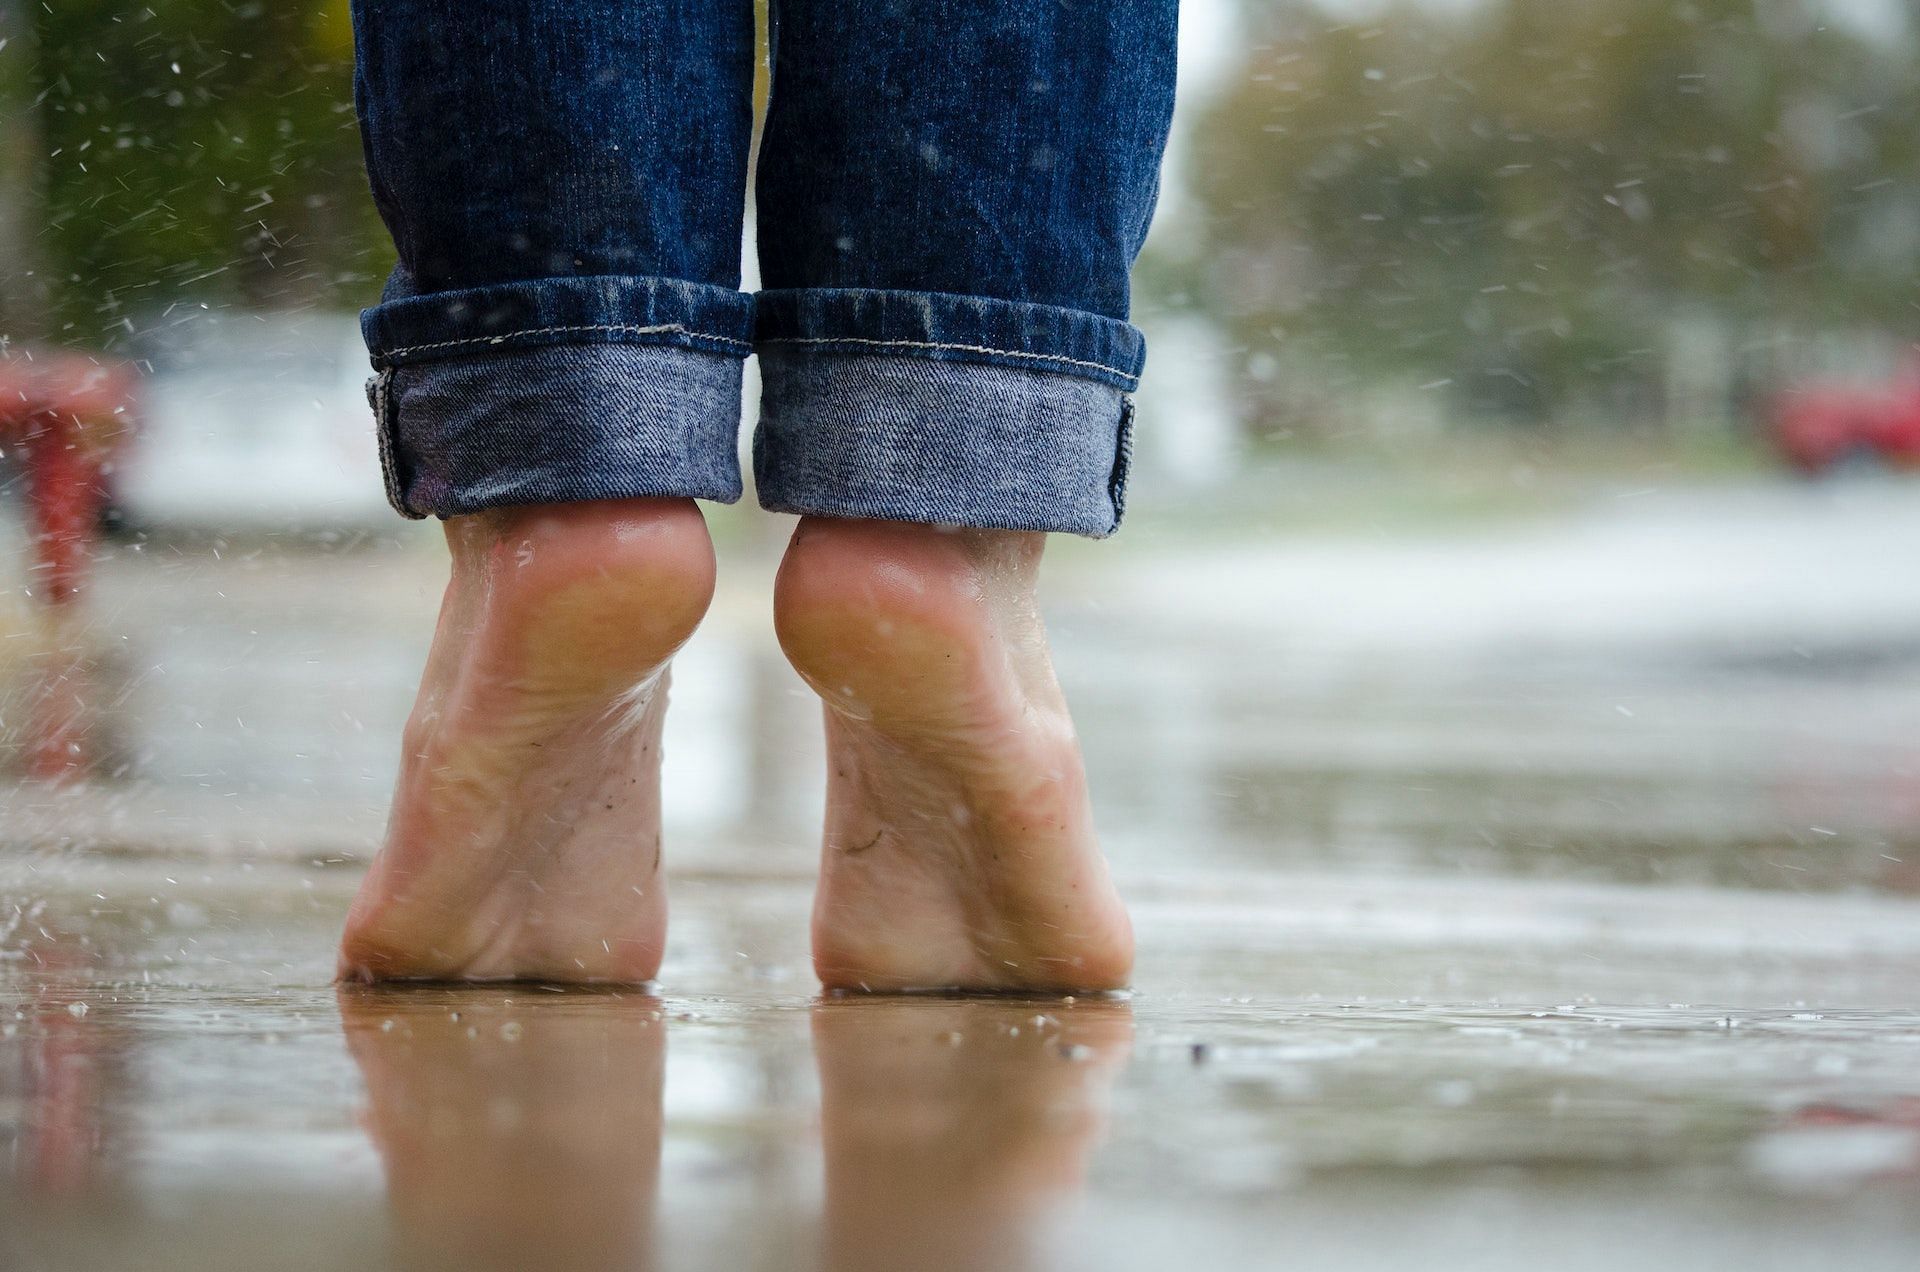 Symptoms of diabetic foot may include skin discoloration, blisters, and more. (Photo via Pexels/Alicia Zinn)